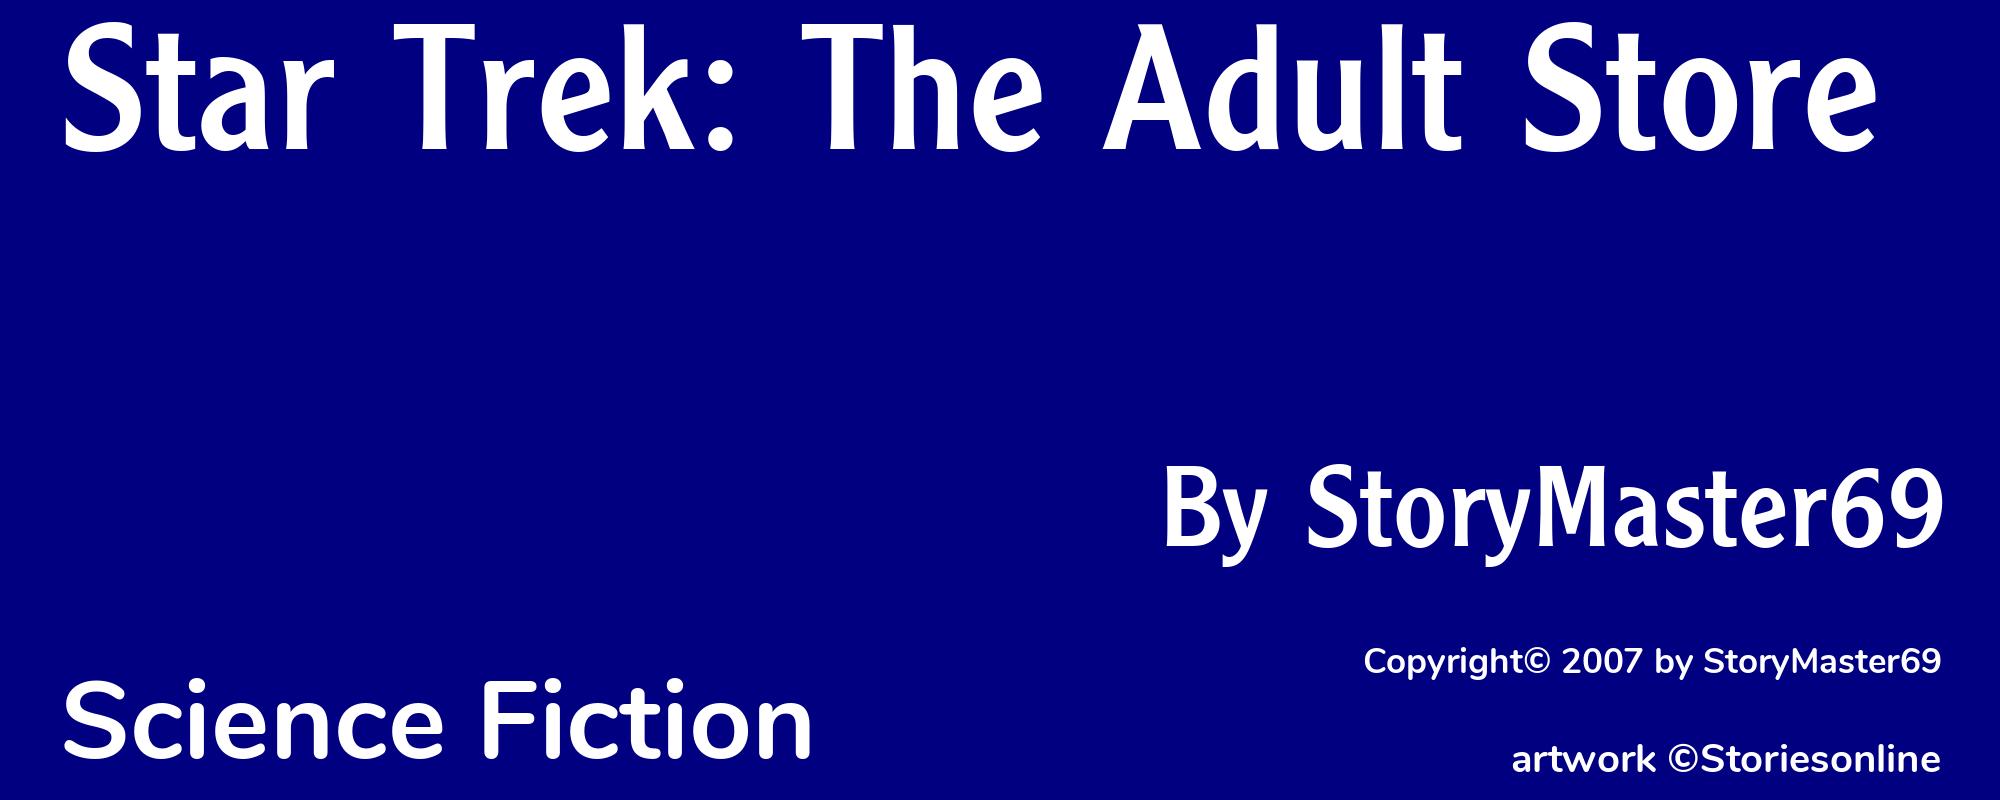 Star Trek: The Adult Store - Cover